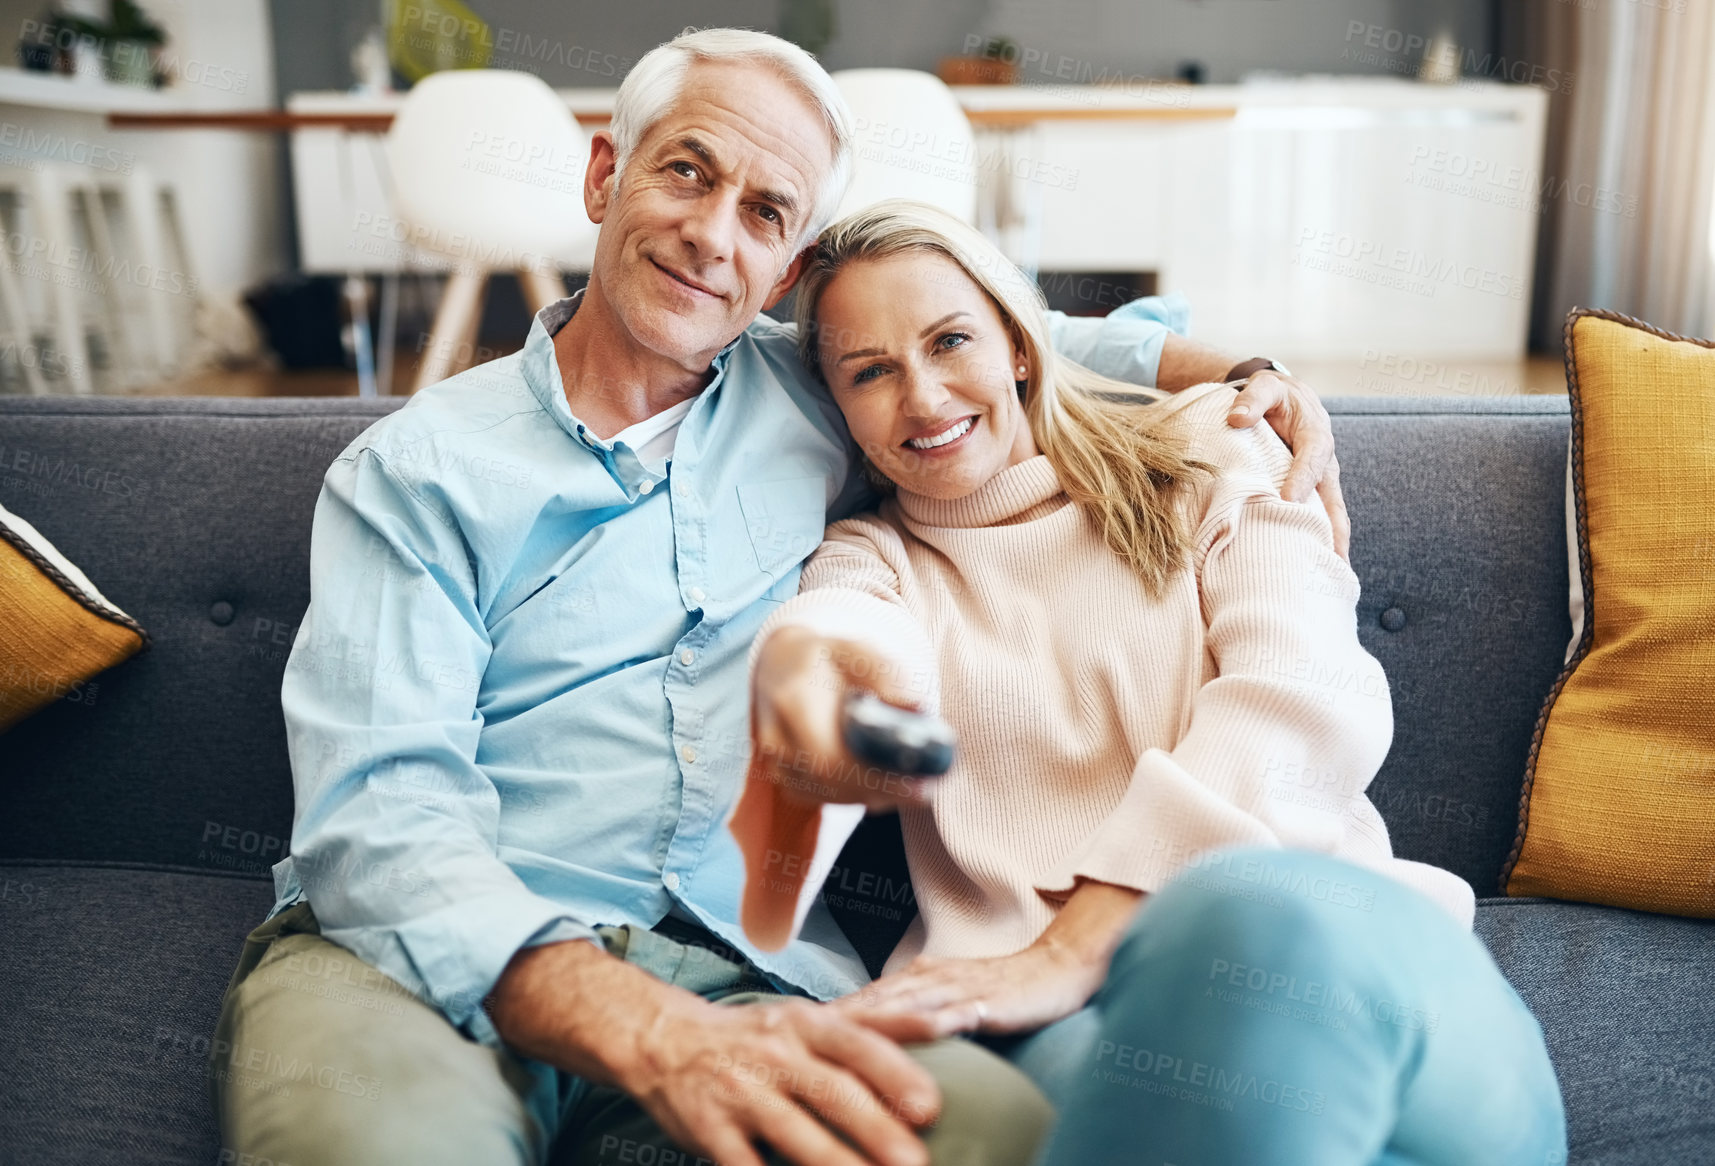 Buy stock photo Cropped shot of an affectionate mature couple relaxing on the sofa at home